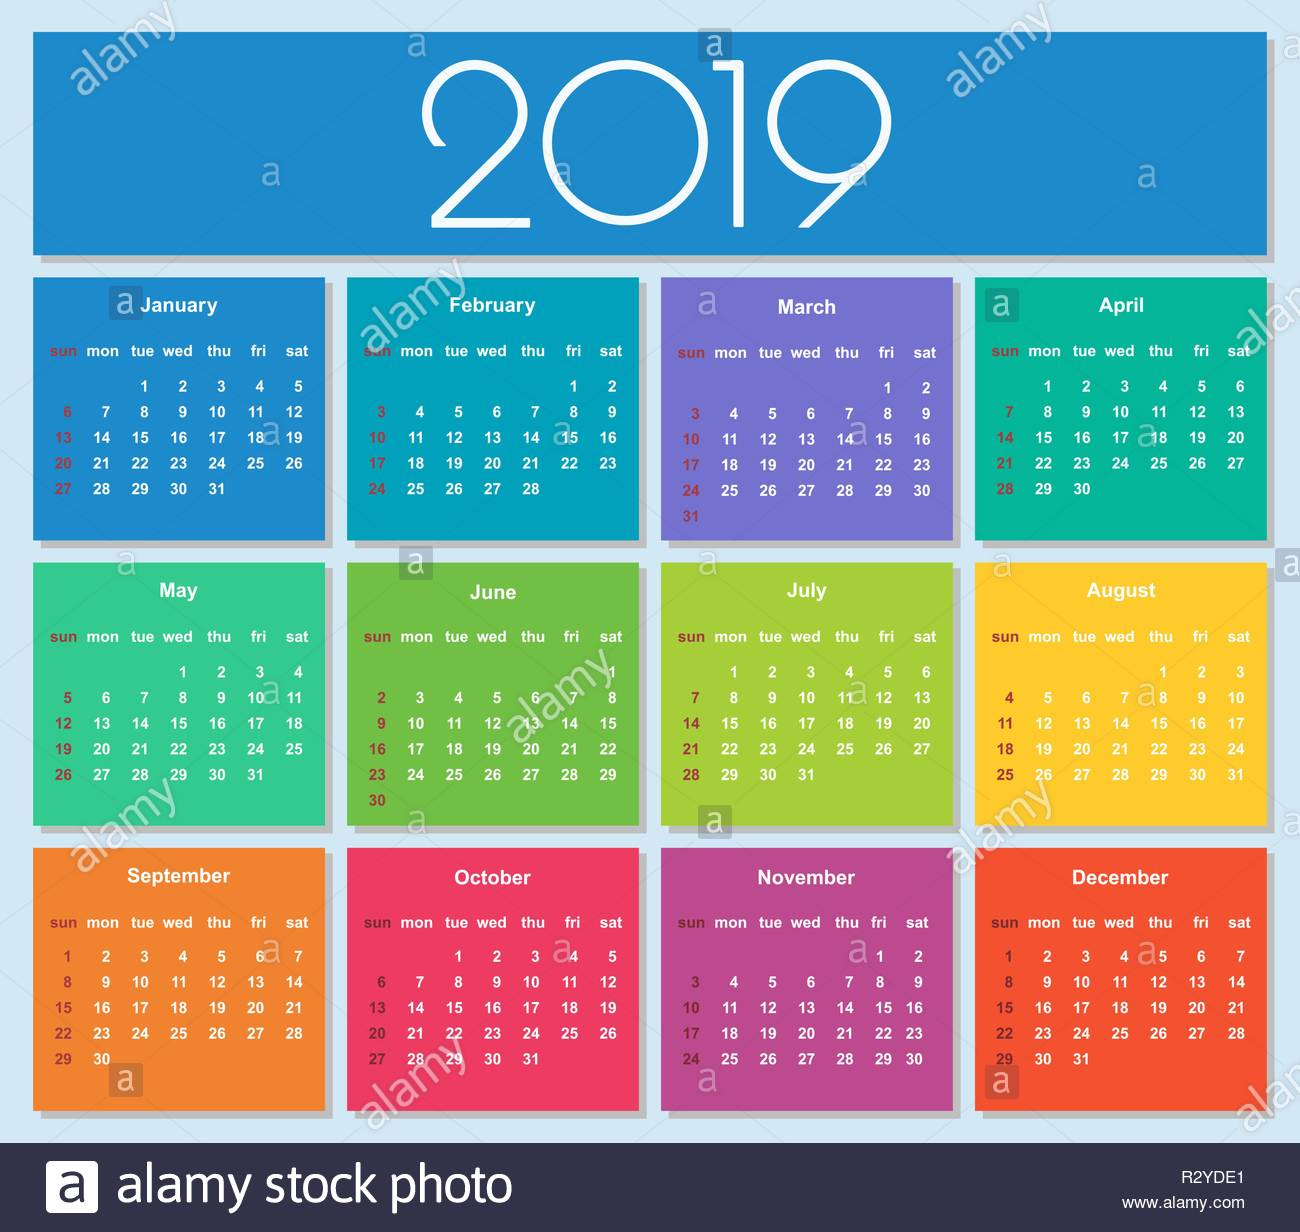 New Year Colorful Calendar | Wallpapers Snipe